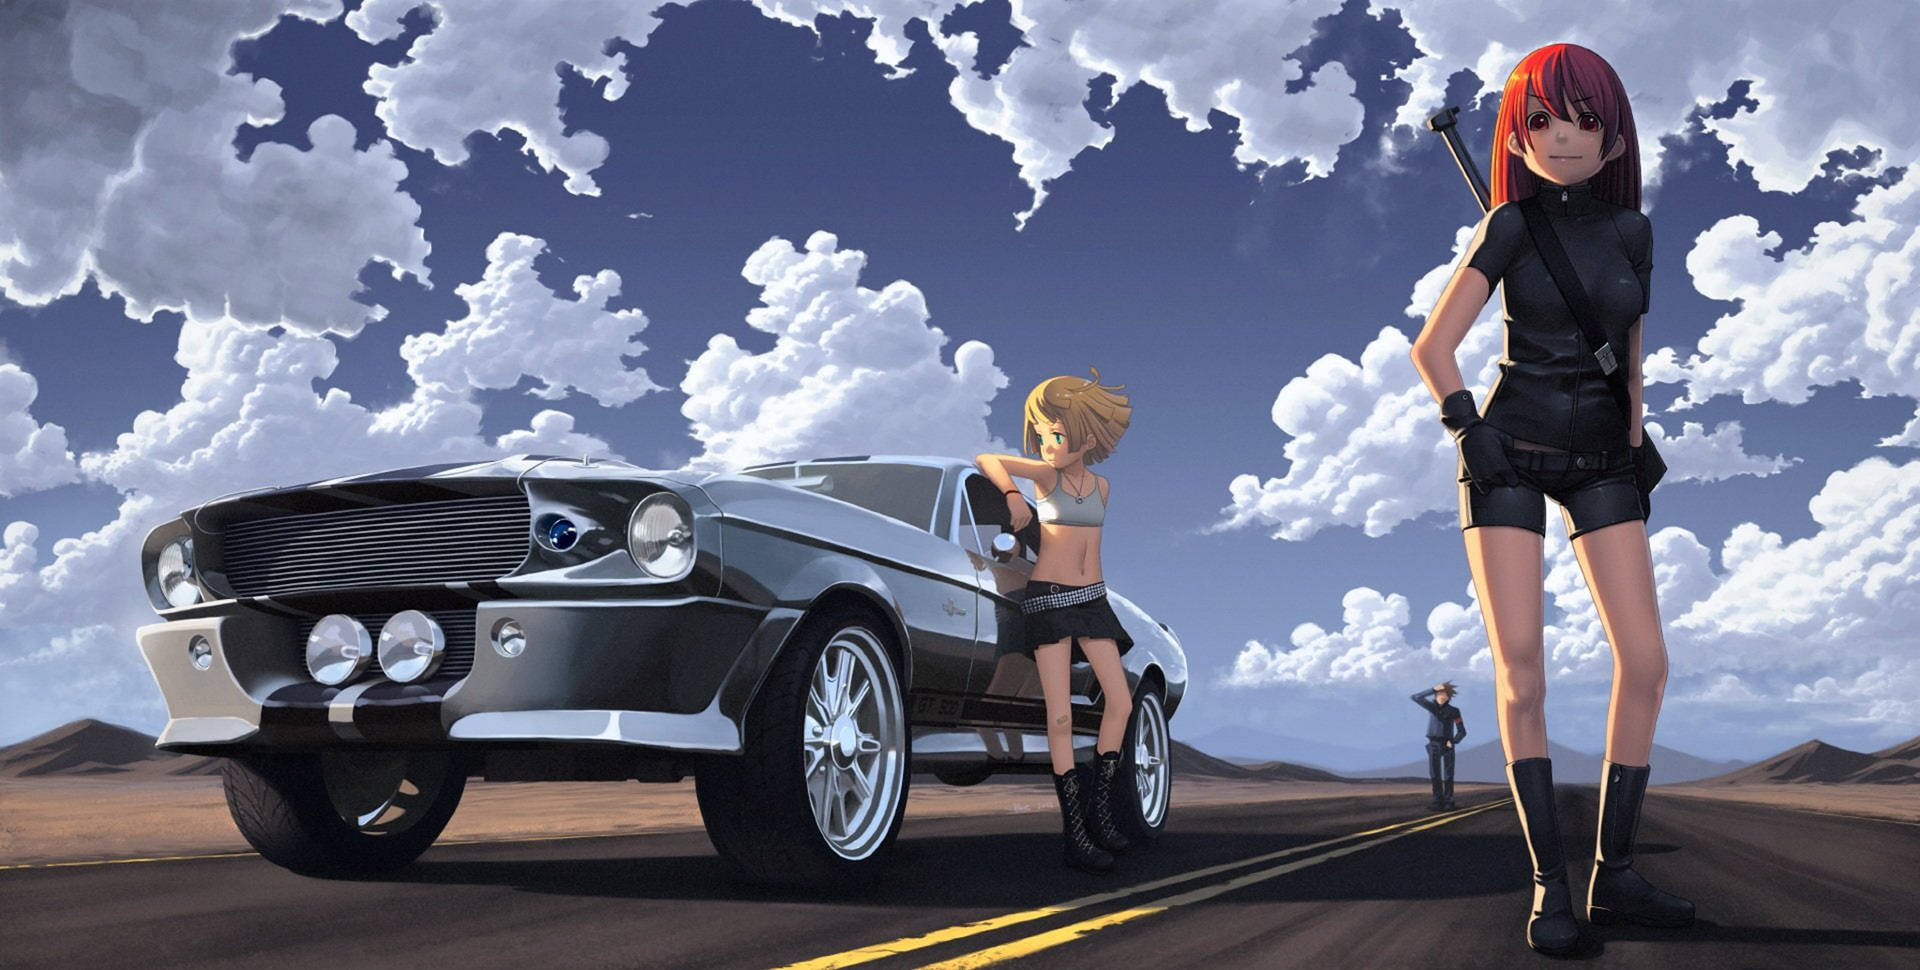 Mustang Anime Car Background